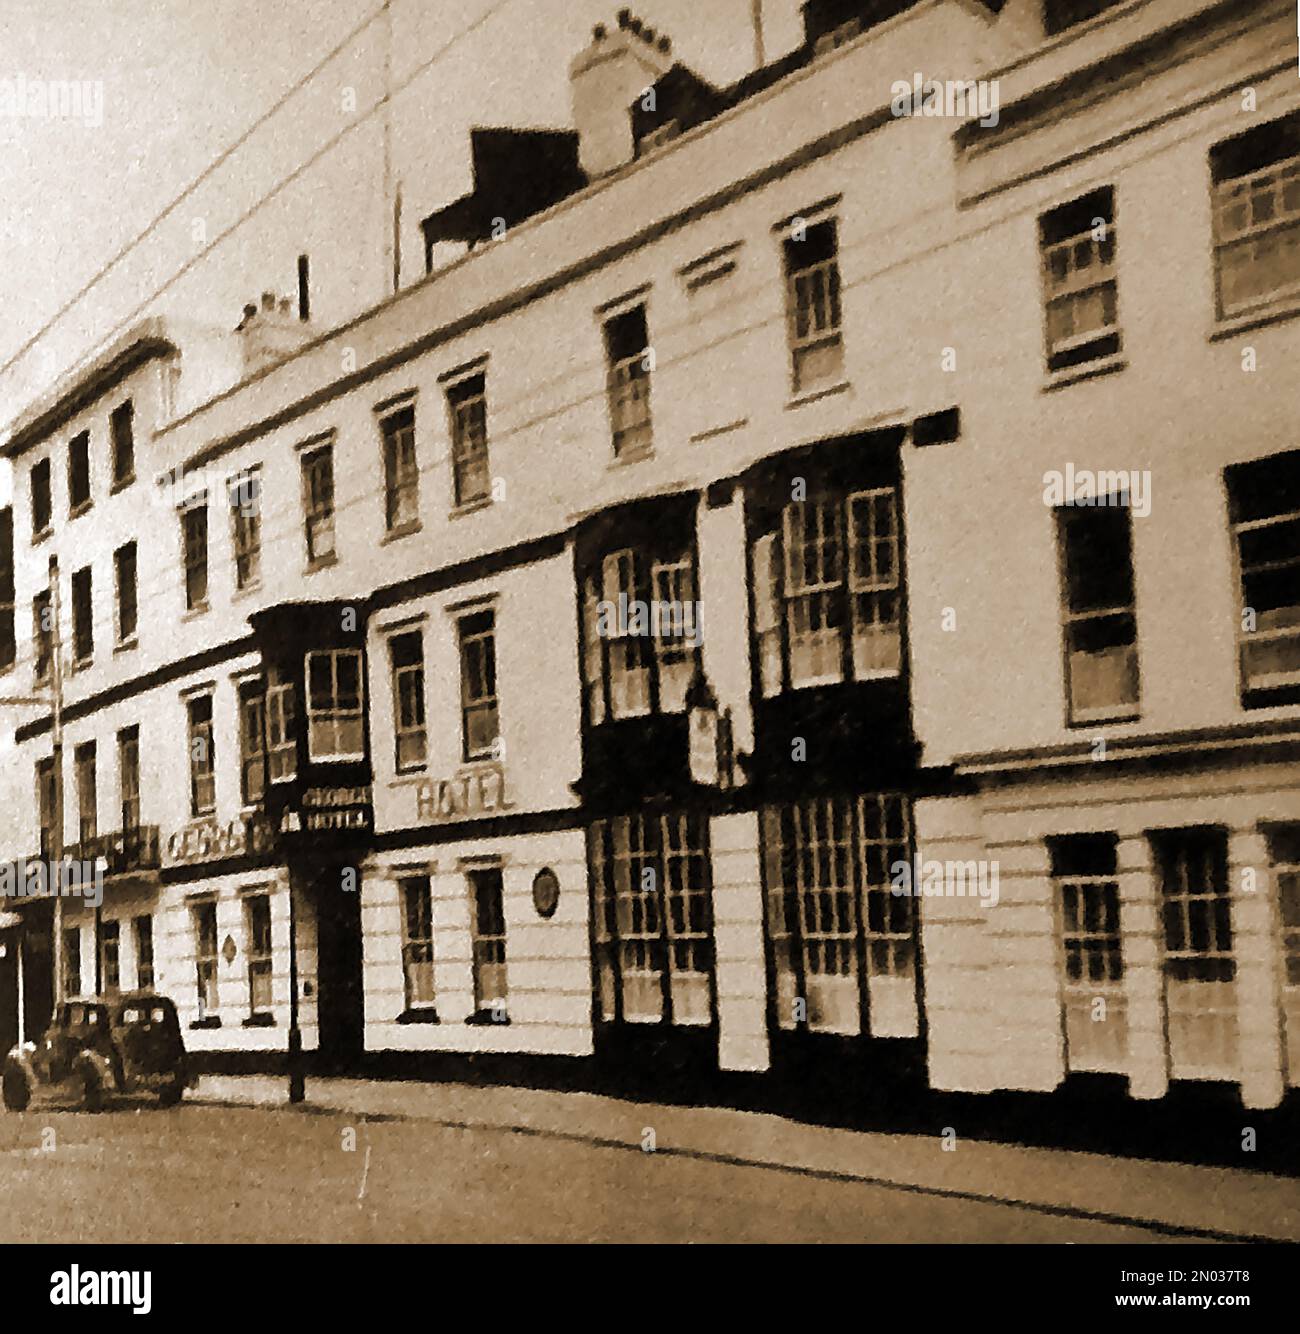 British pubs inns & taverns - A circa 1940 old photograph of the George at Portsmouth as it looked before it was destroyed by bombs in WWII.  When searching the bombed out roof space a 18th century sailors hat and glove were discovered. Stock Photo